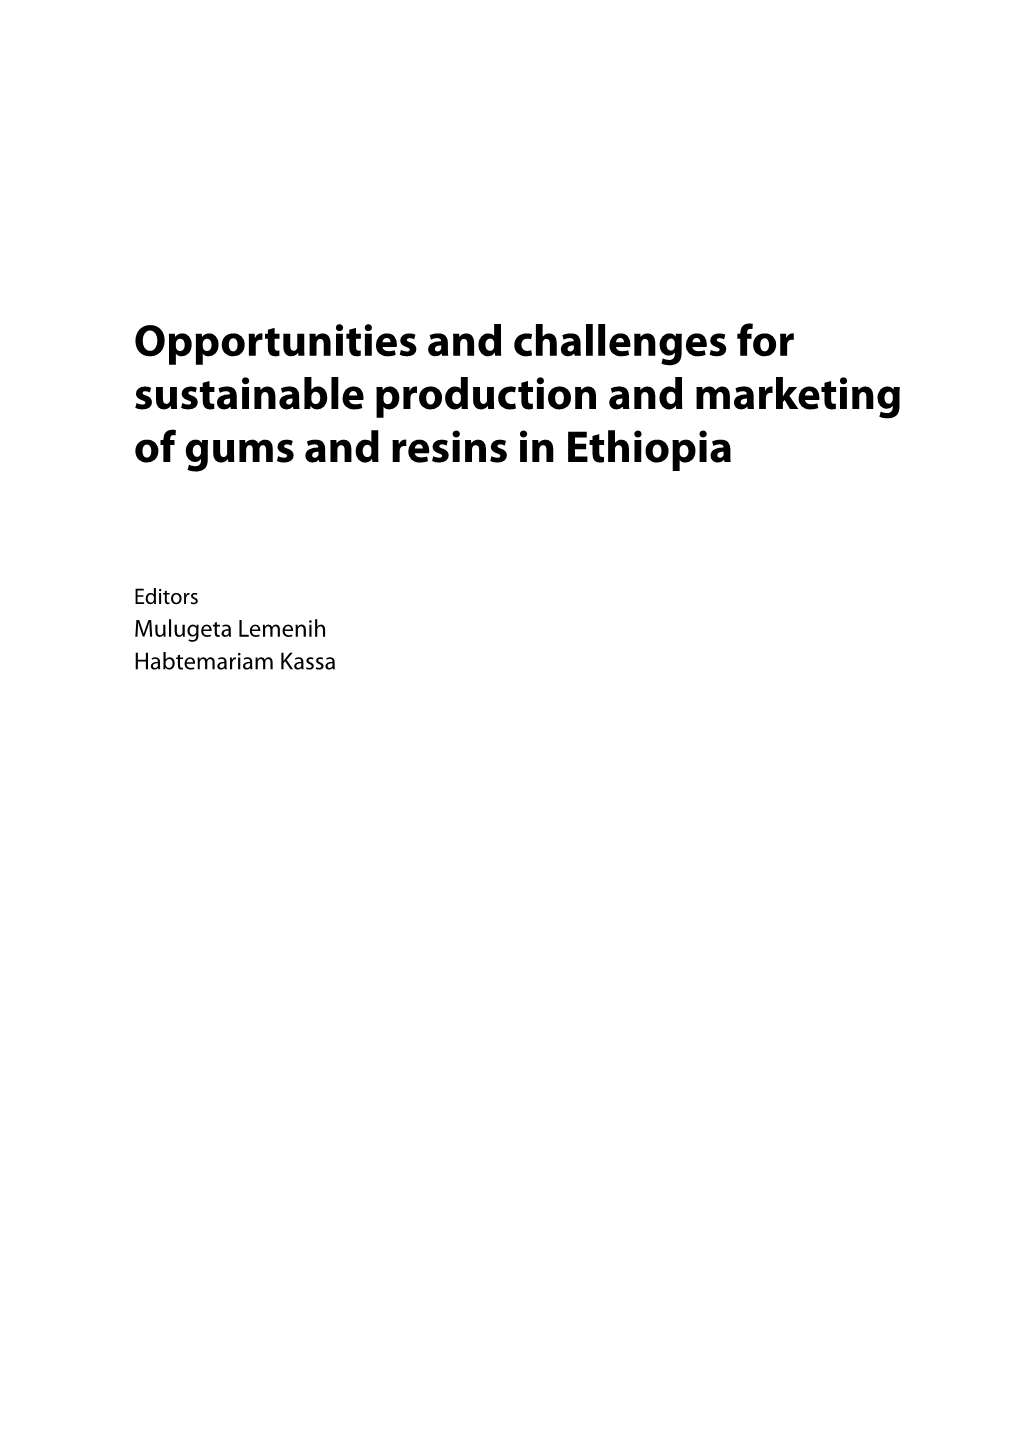 Opportunities and Challenges for Sustainable Production and Marketing of Gums and Resins in Ethiopia